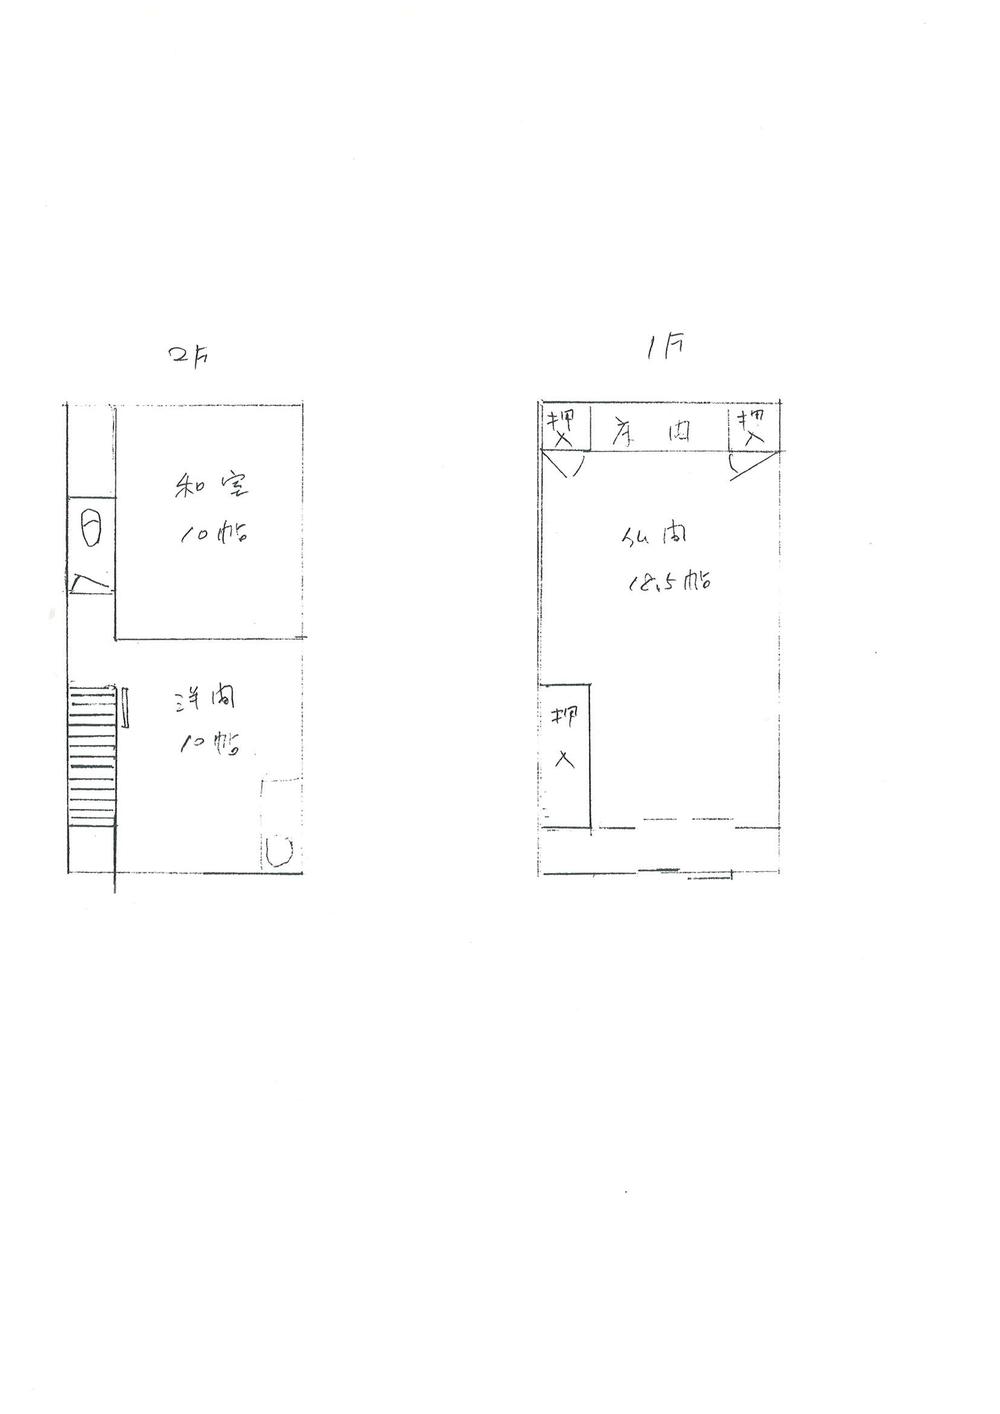 Floor plan. 14.9 million yen, 5DK, Land area 363.29 sq m , Building area 111.8 sq m away from the room Current state priority